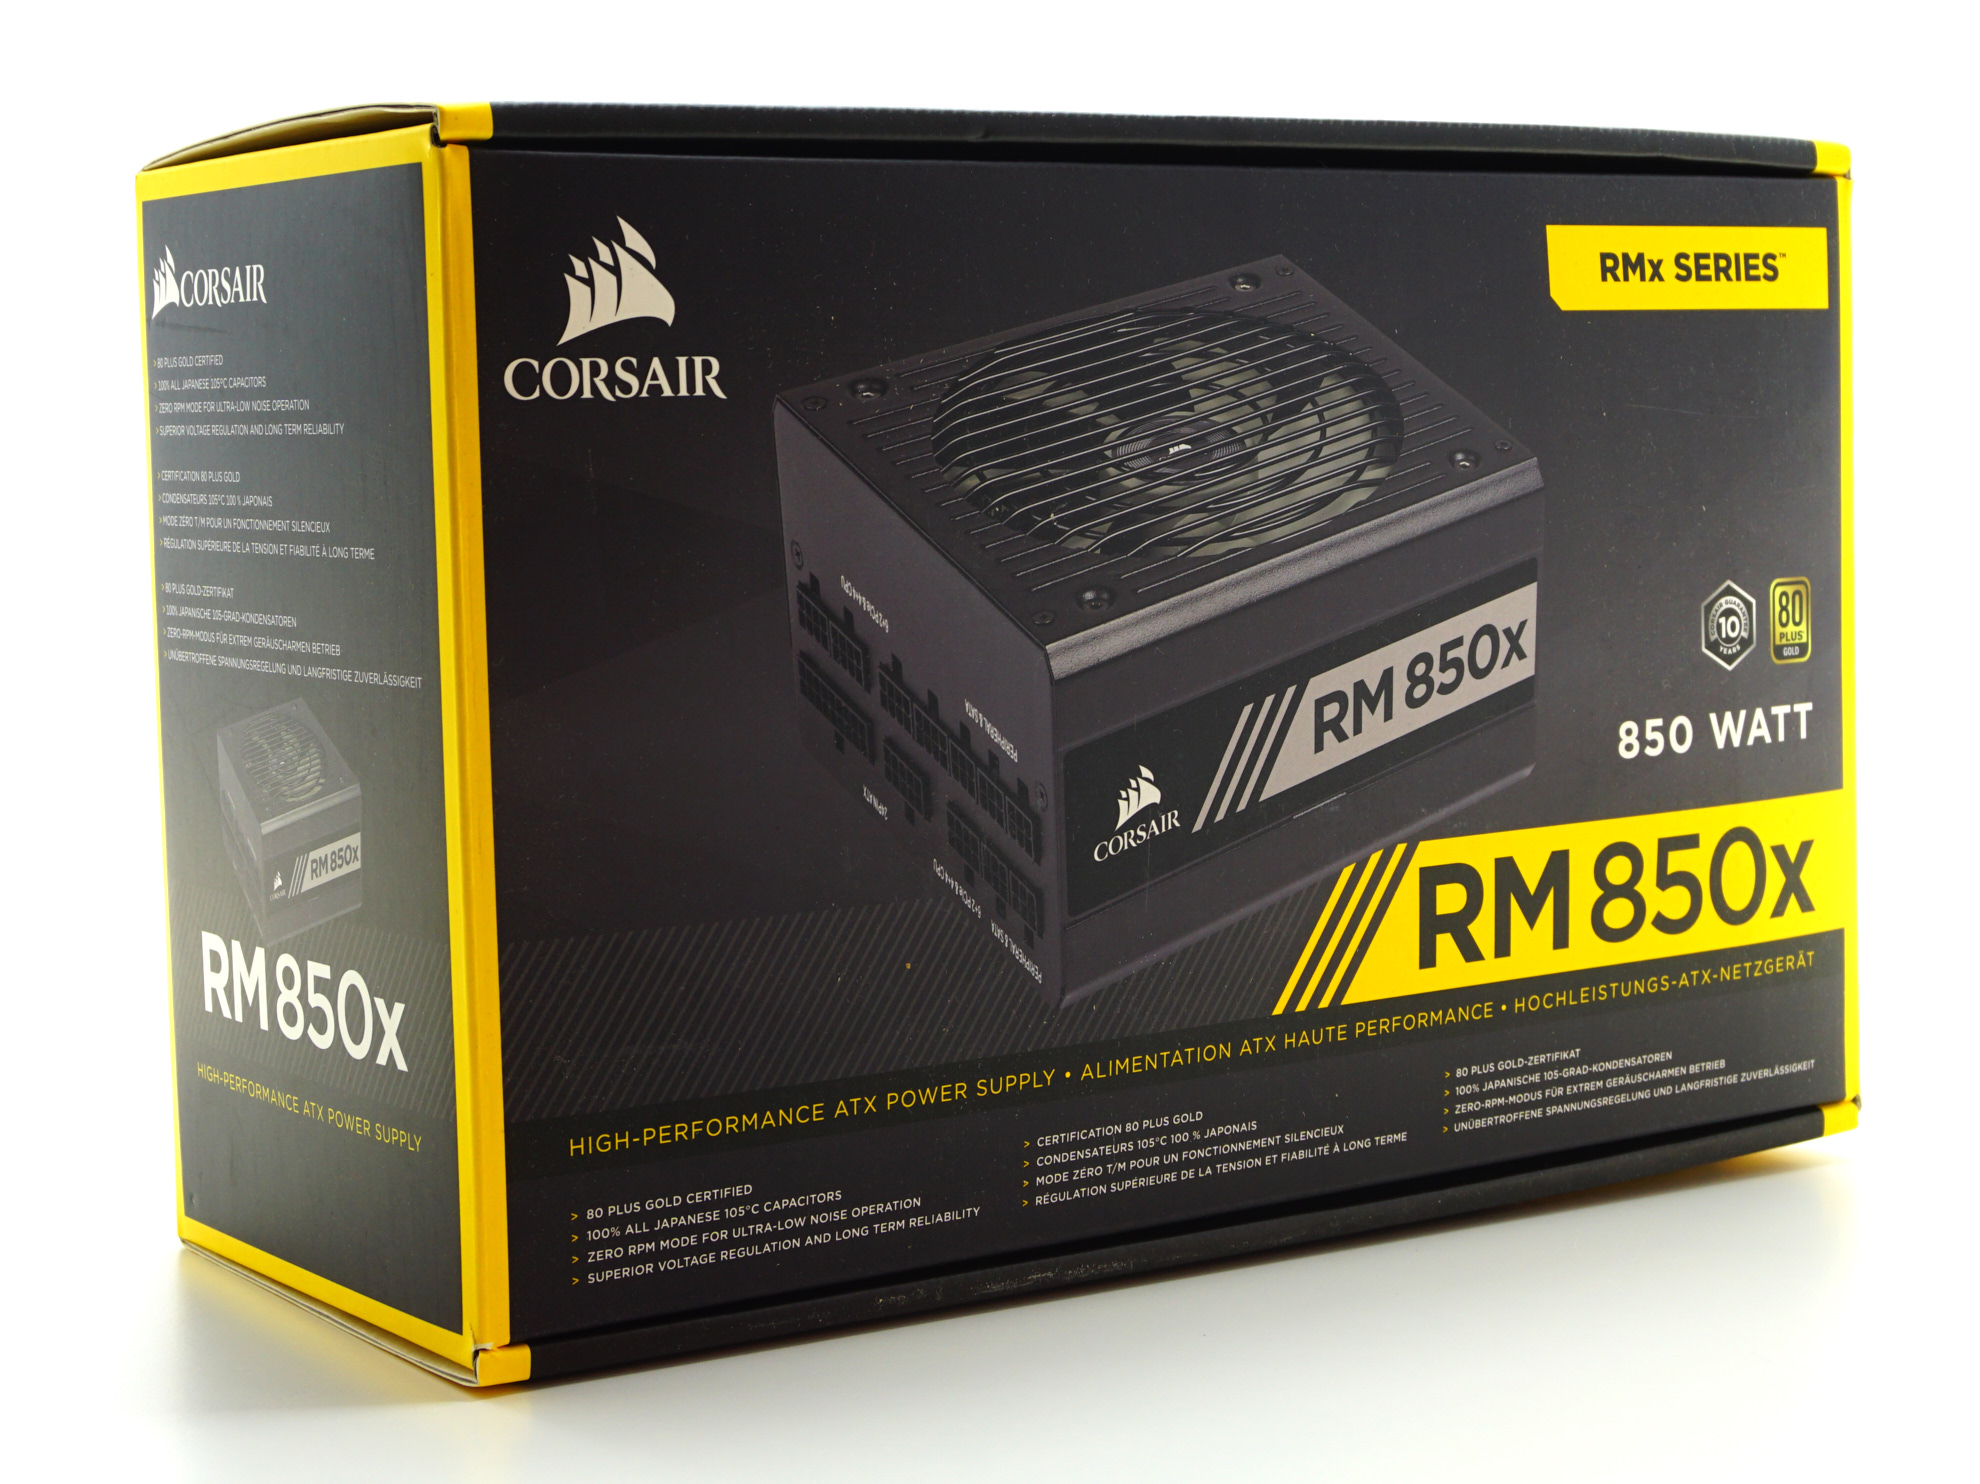 Rm 850x black or yellow label? : r/cablemod